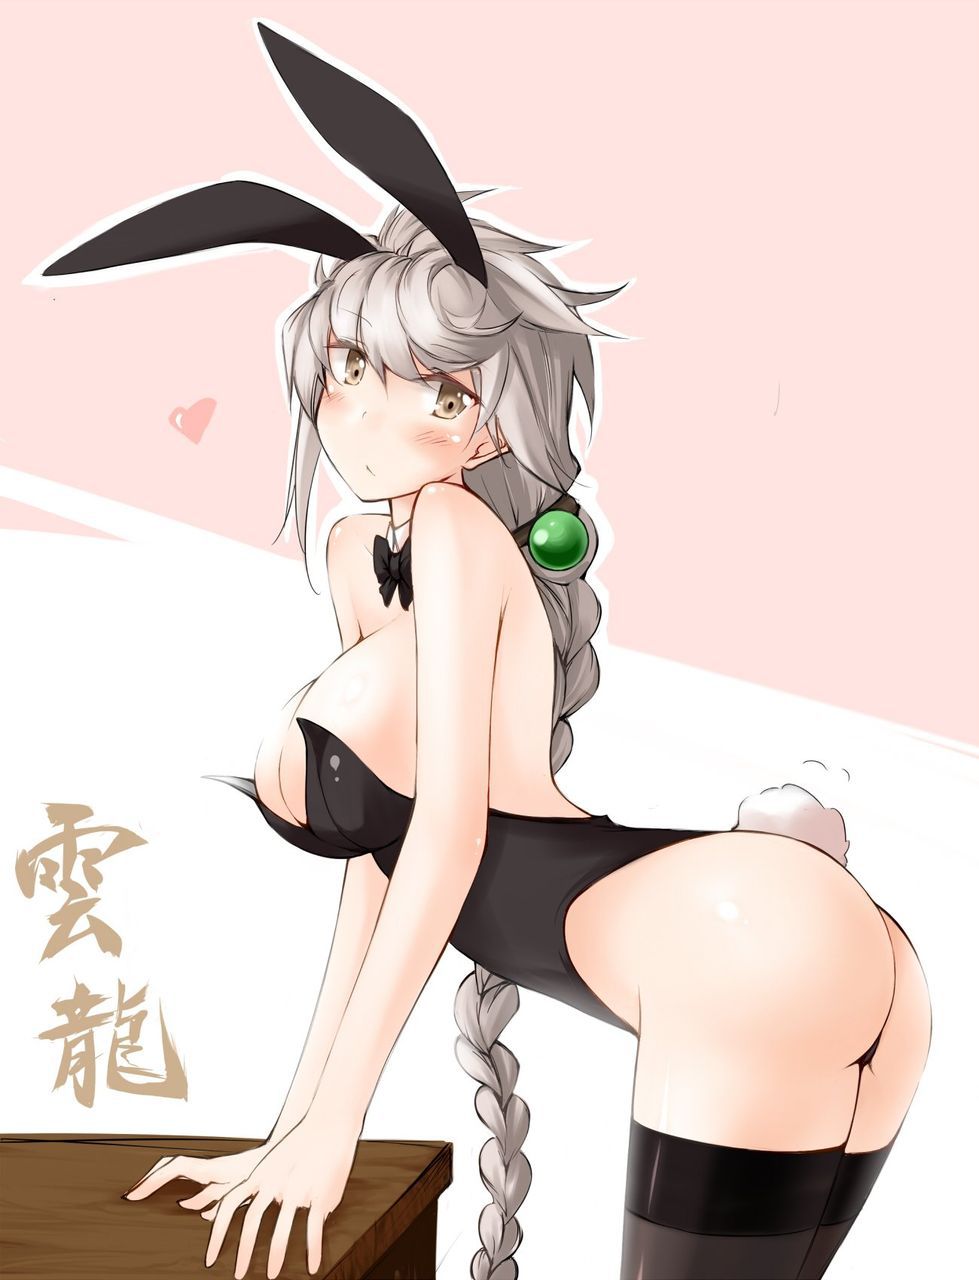 Image warehouse where people expect a Bunny girl. 11